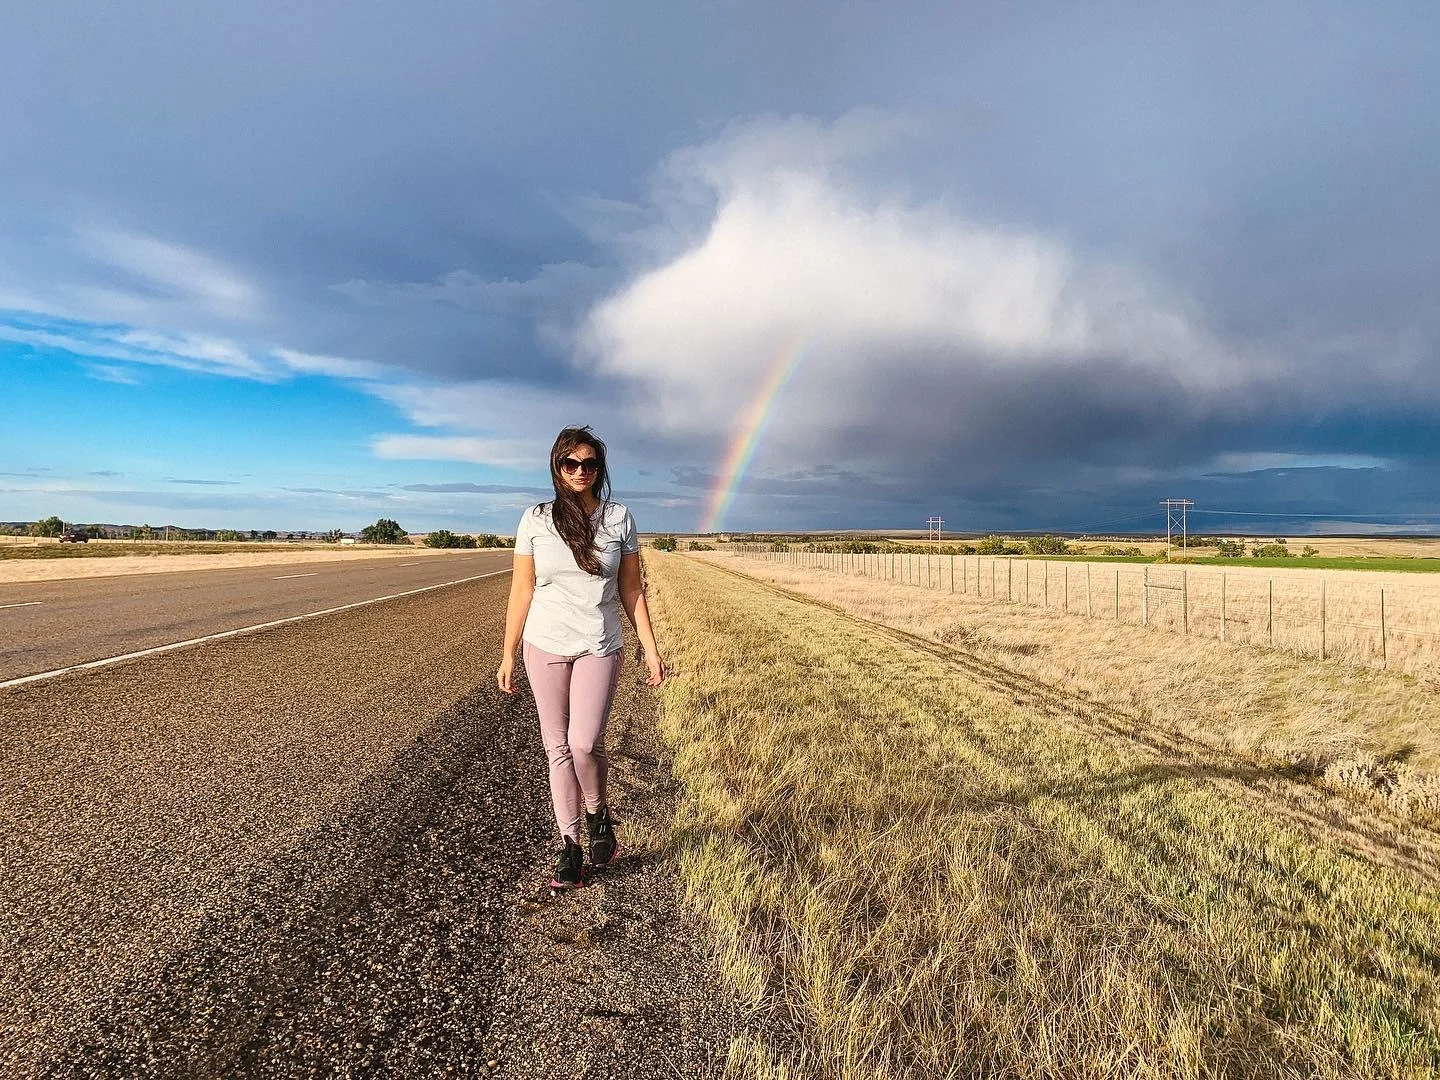 Walking roadside with a rainbow in background